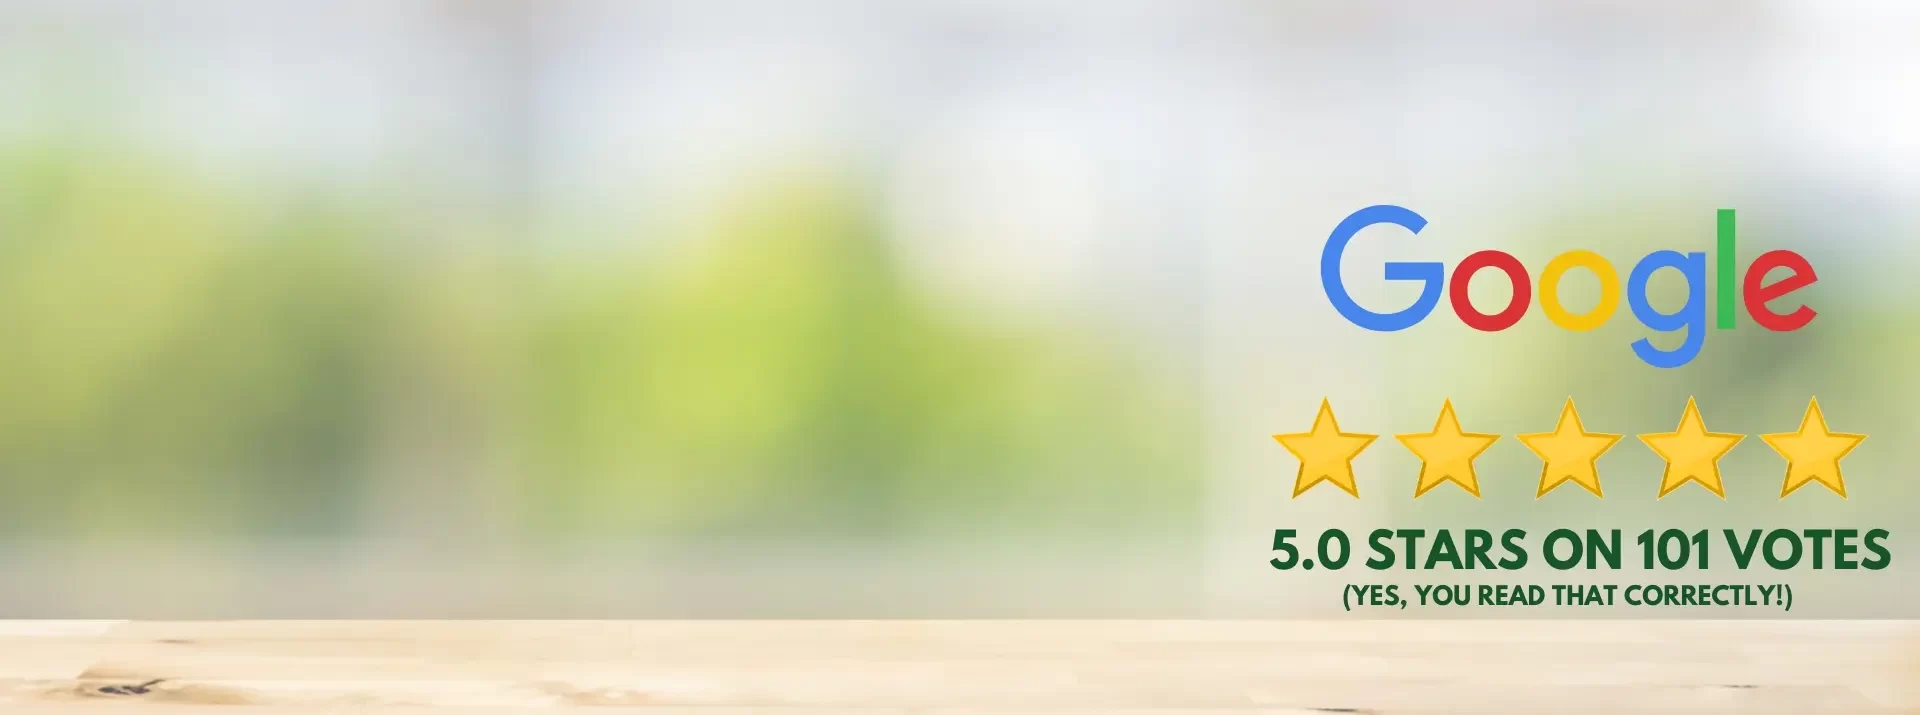 Find out why everyone is rating us 5.0 stars and how we can offer you excellent service too